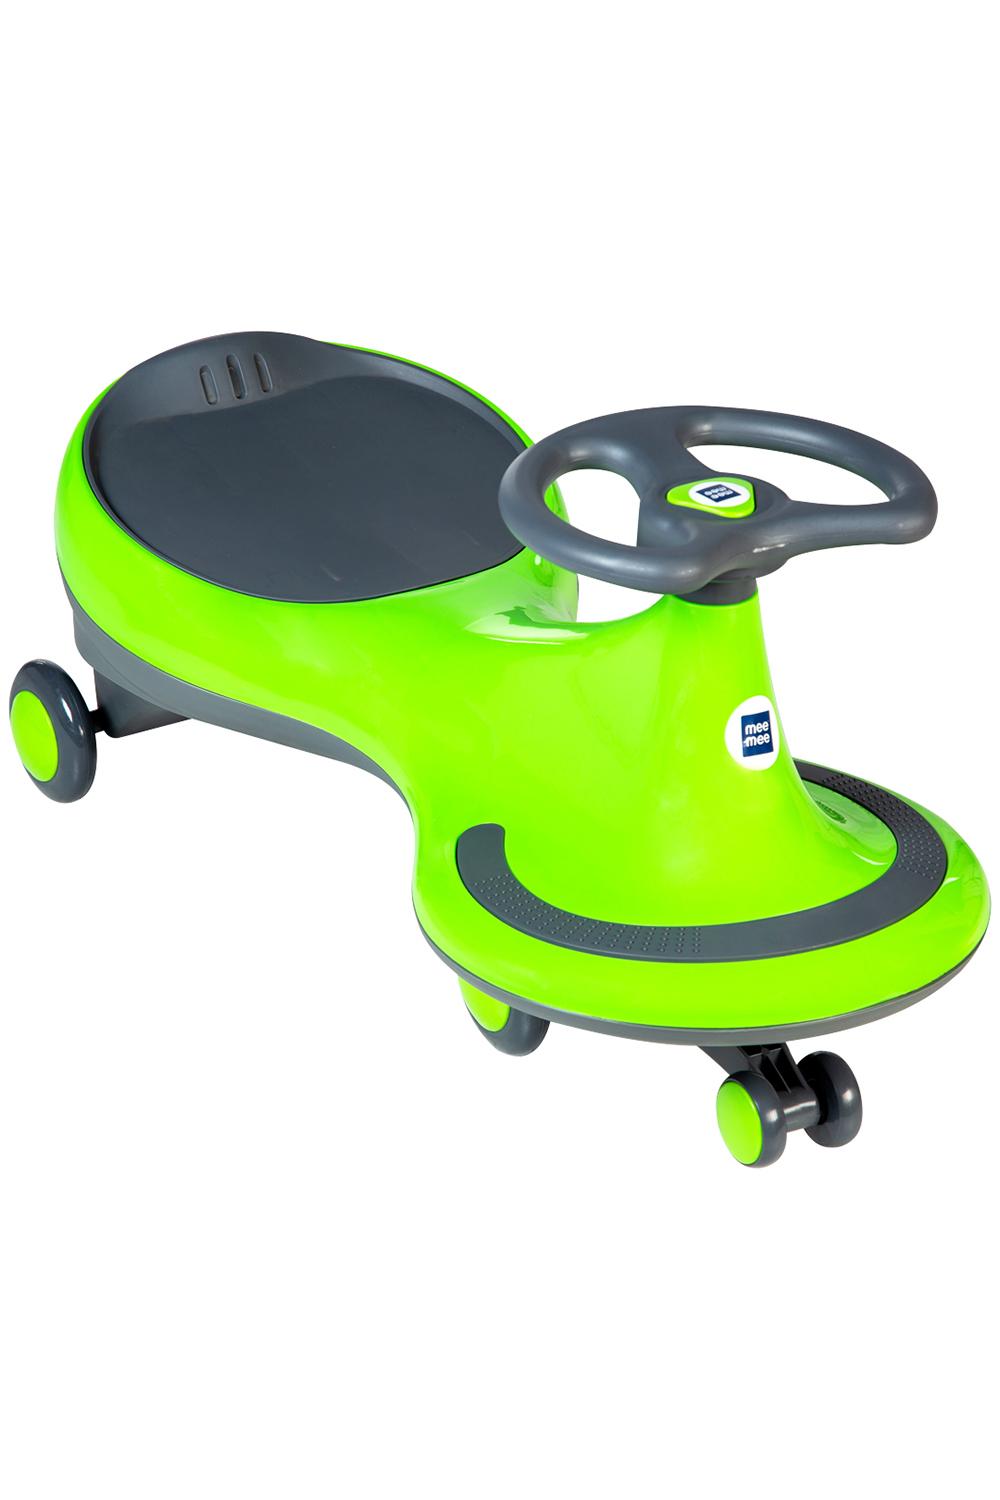 Mee Mee Easy to Ride Baby Twister Swing Cars for Kids(Green)